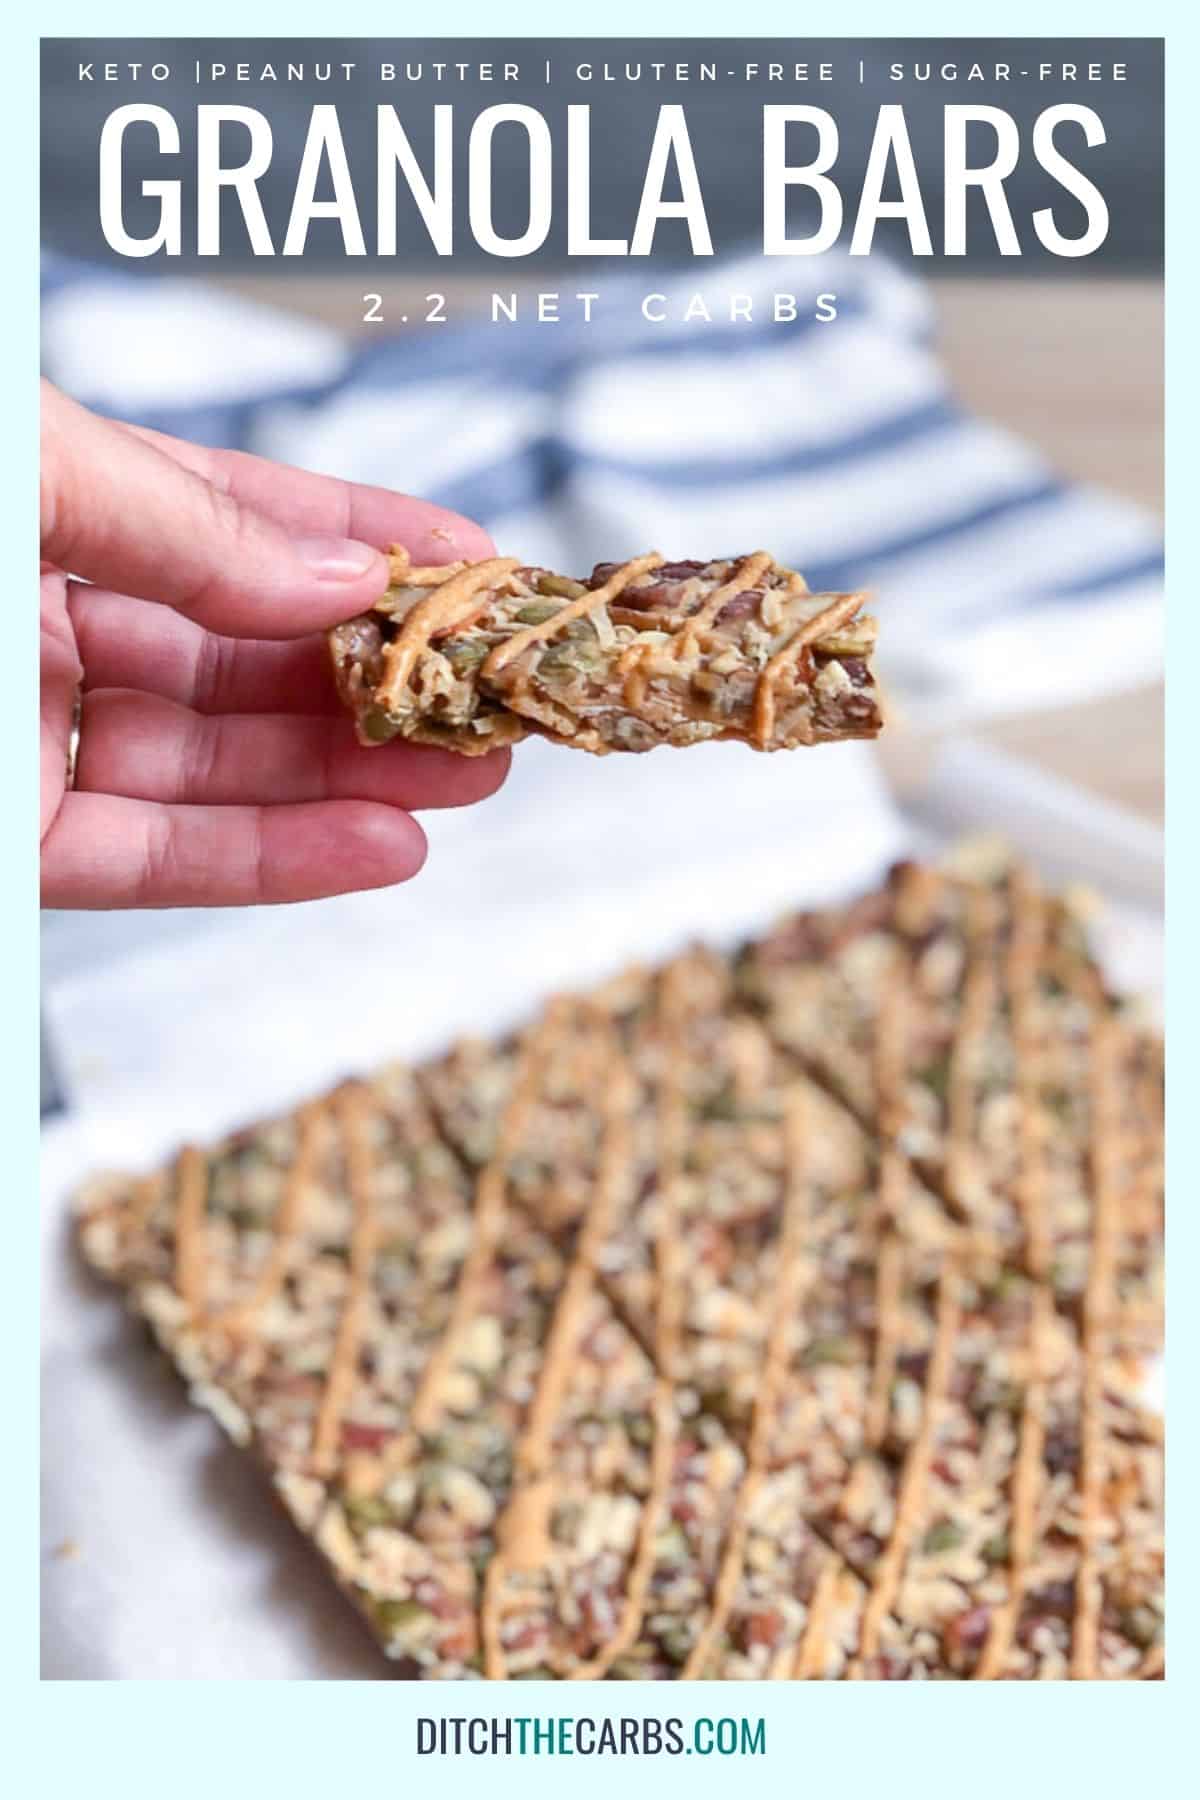 A hand is lifting one keto peanut butter granola bar from the rest of the granola bars resting on the counter.